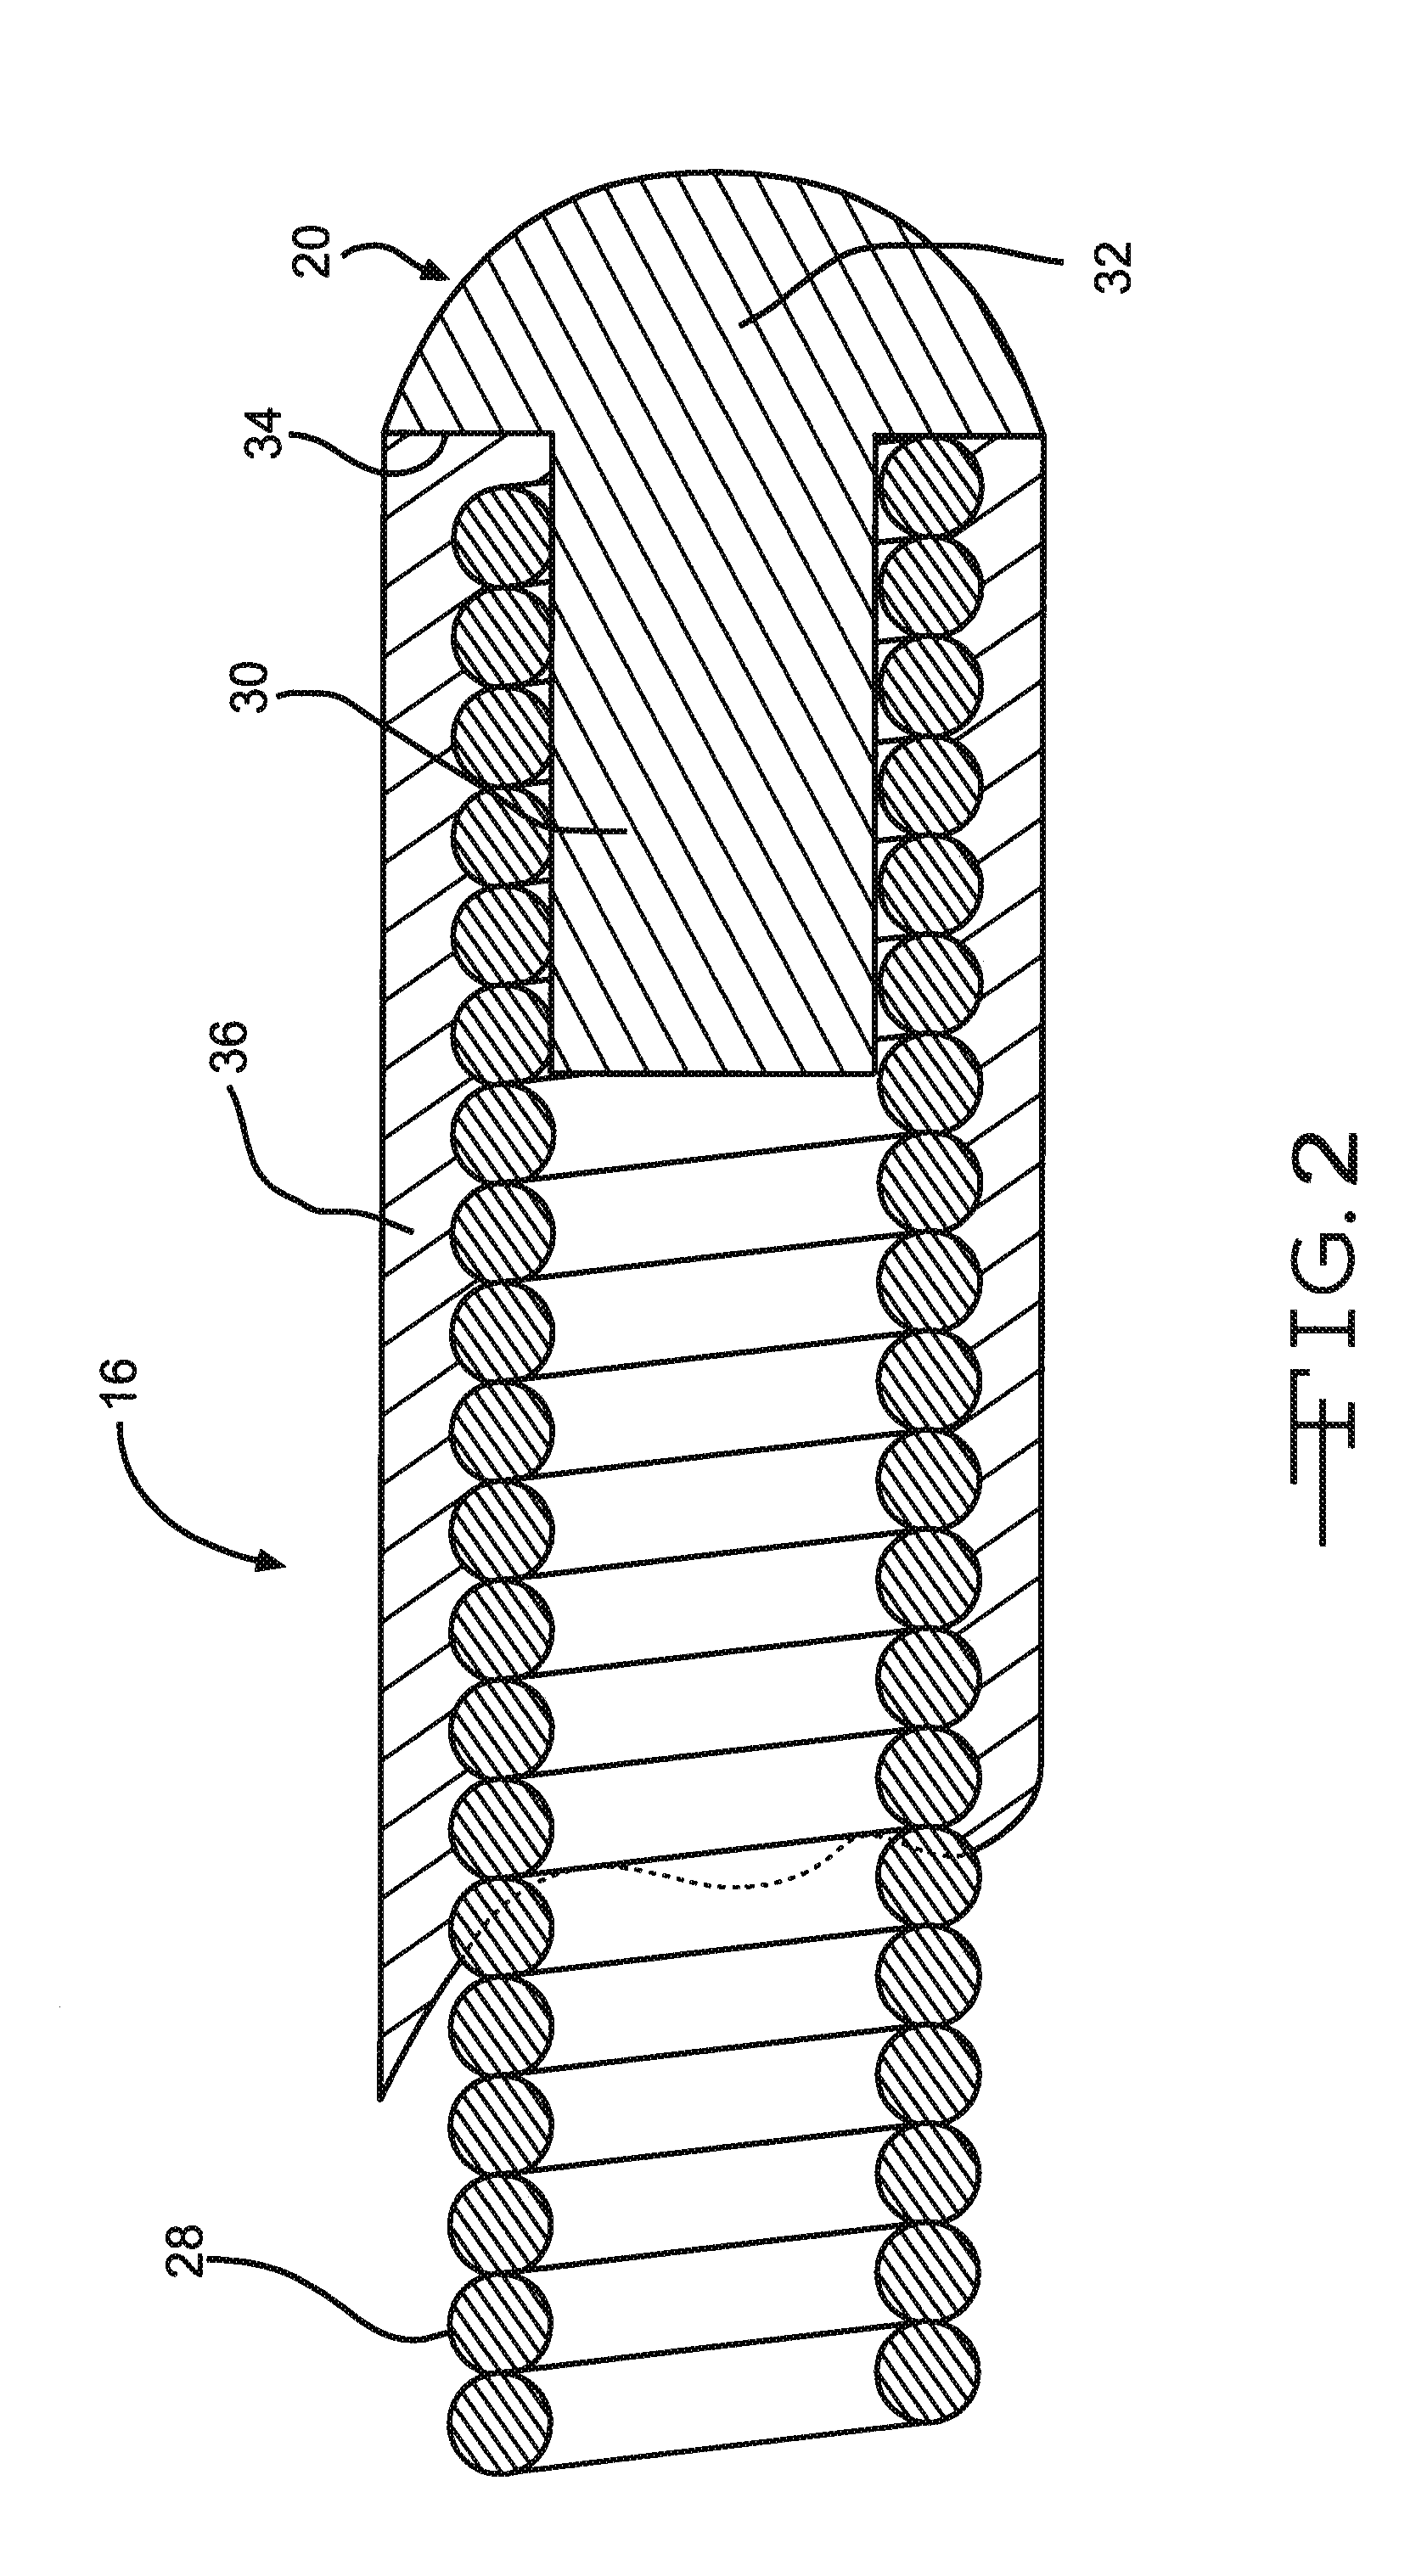 Method For Providing An Implantable Electrical Lead Wire